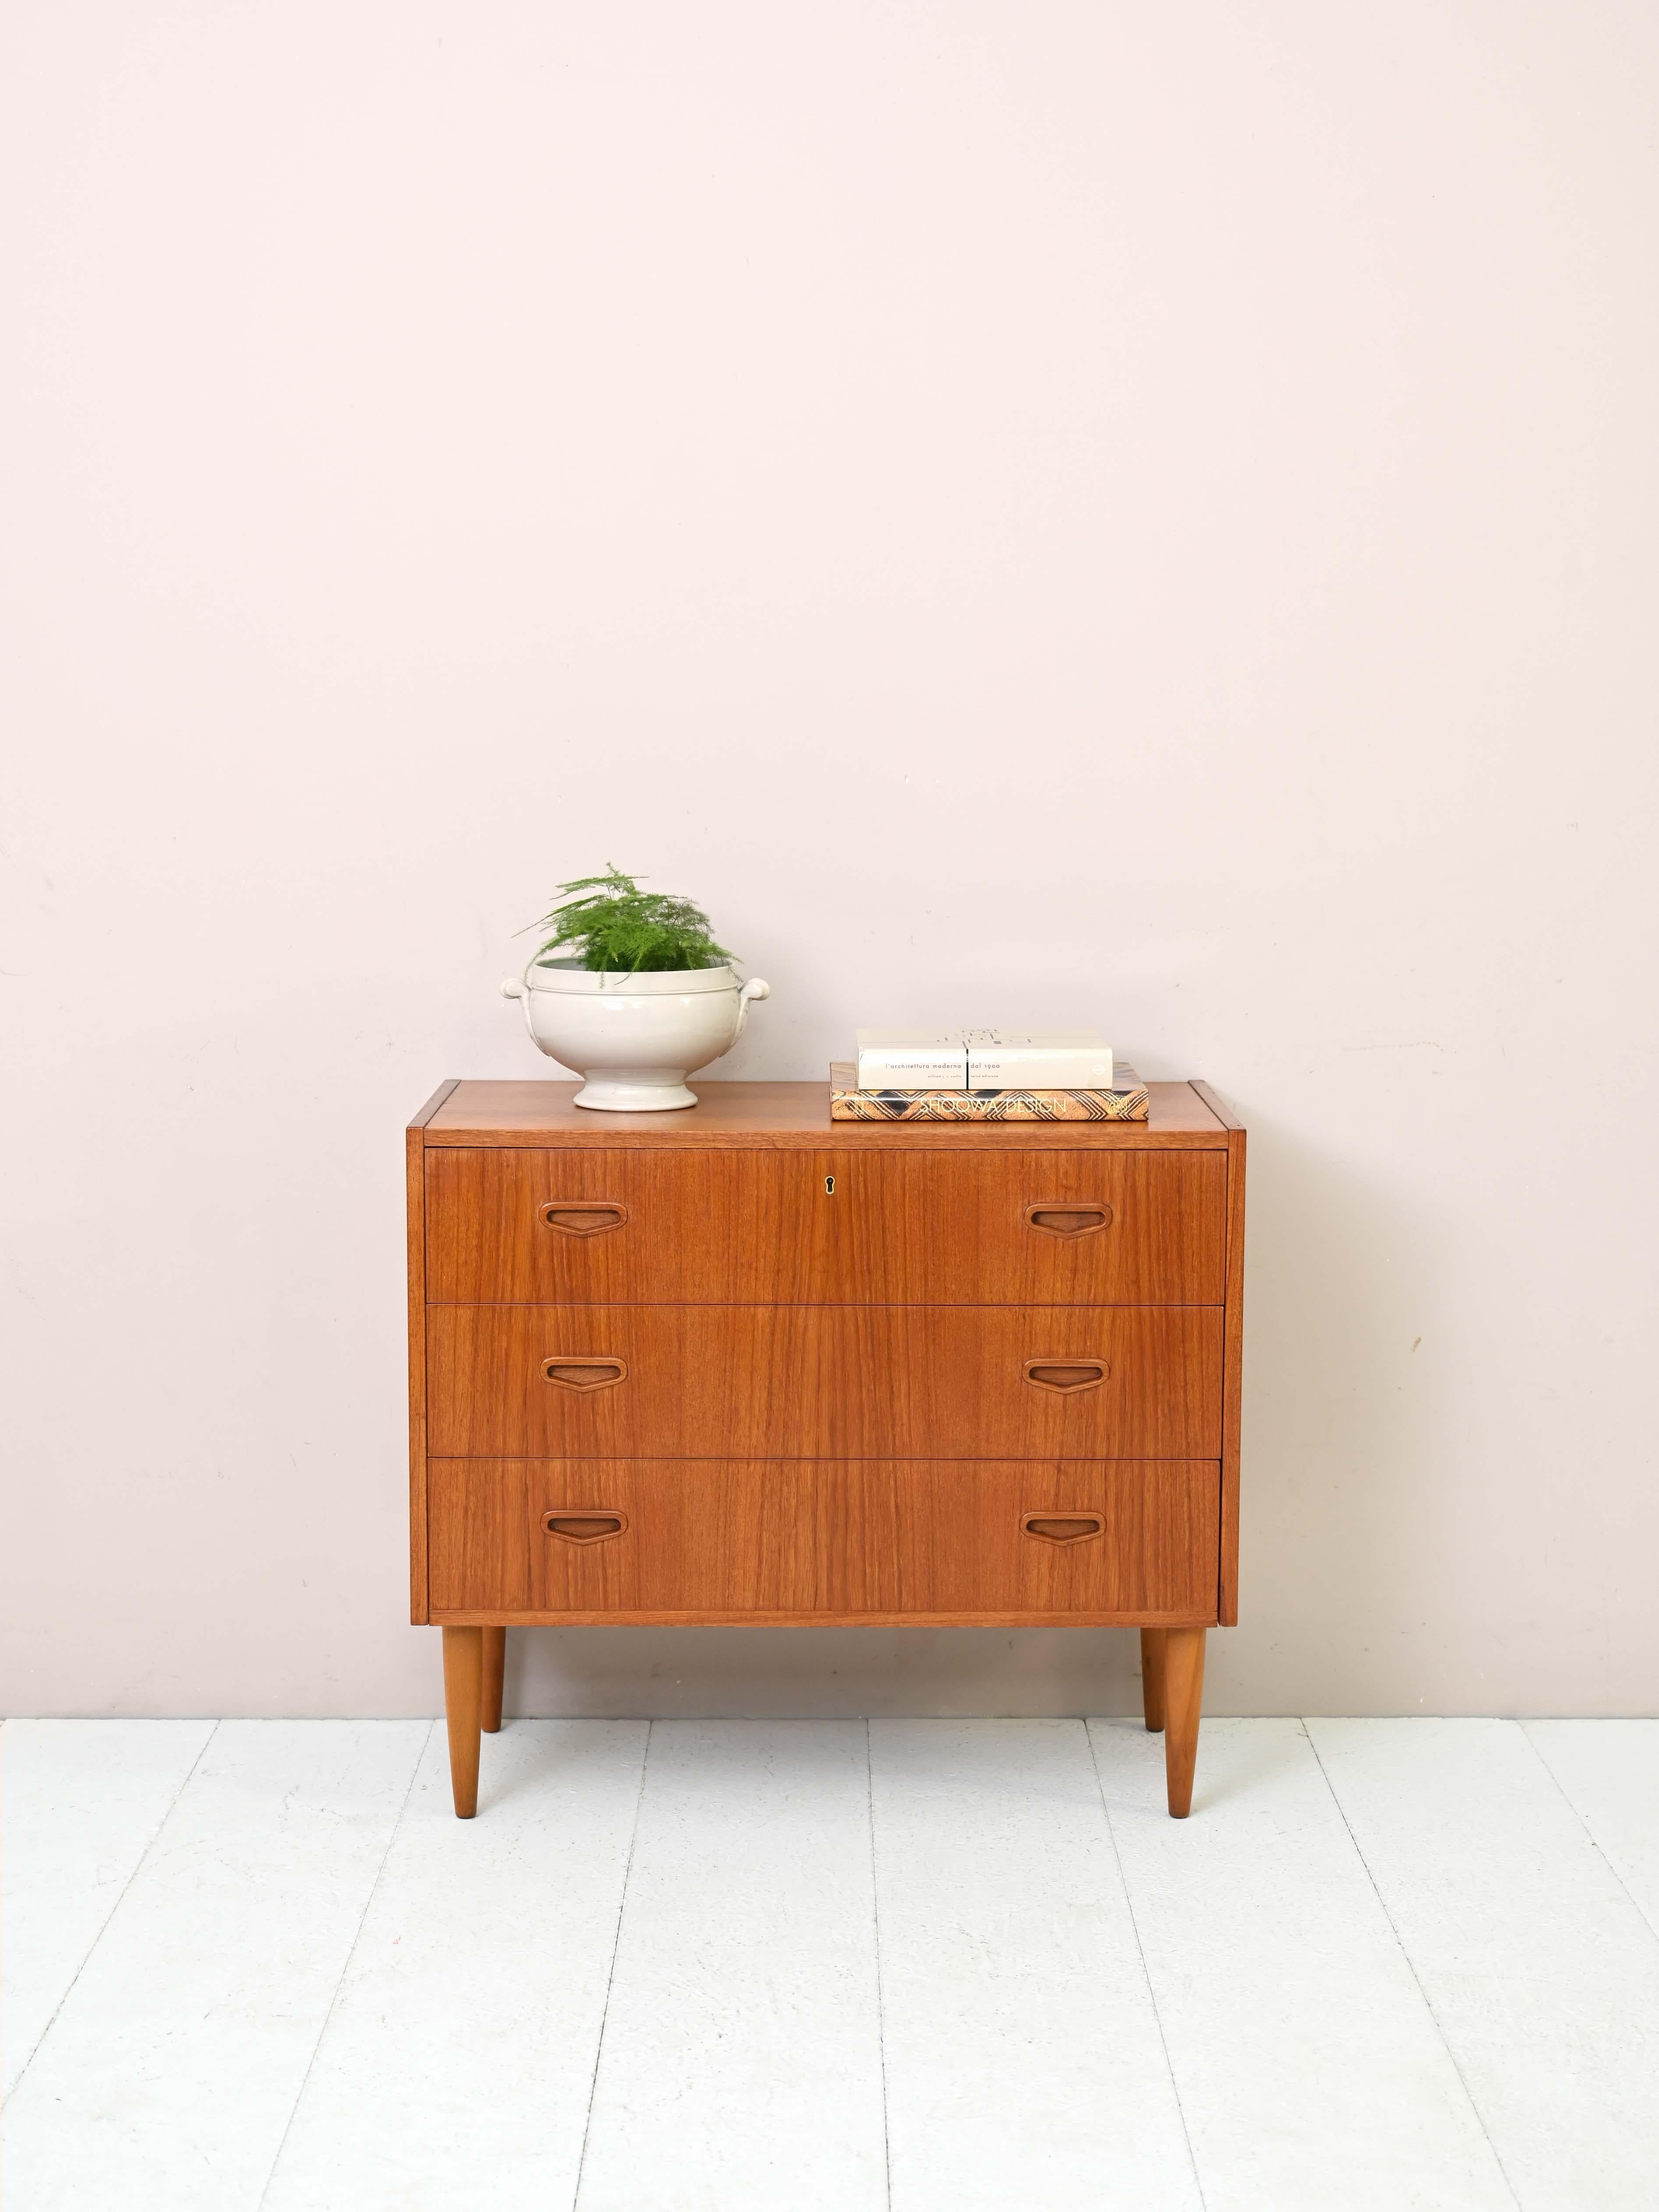 1960s teak cabinet with drawers.

A modern piece of furniture with a minimalist design. This chest of drawers consists of three drawers, the first of which has a lock. The handles are carved wood, in perfect Nordic style.
The tapered legs present